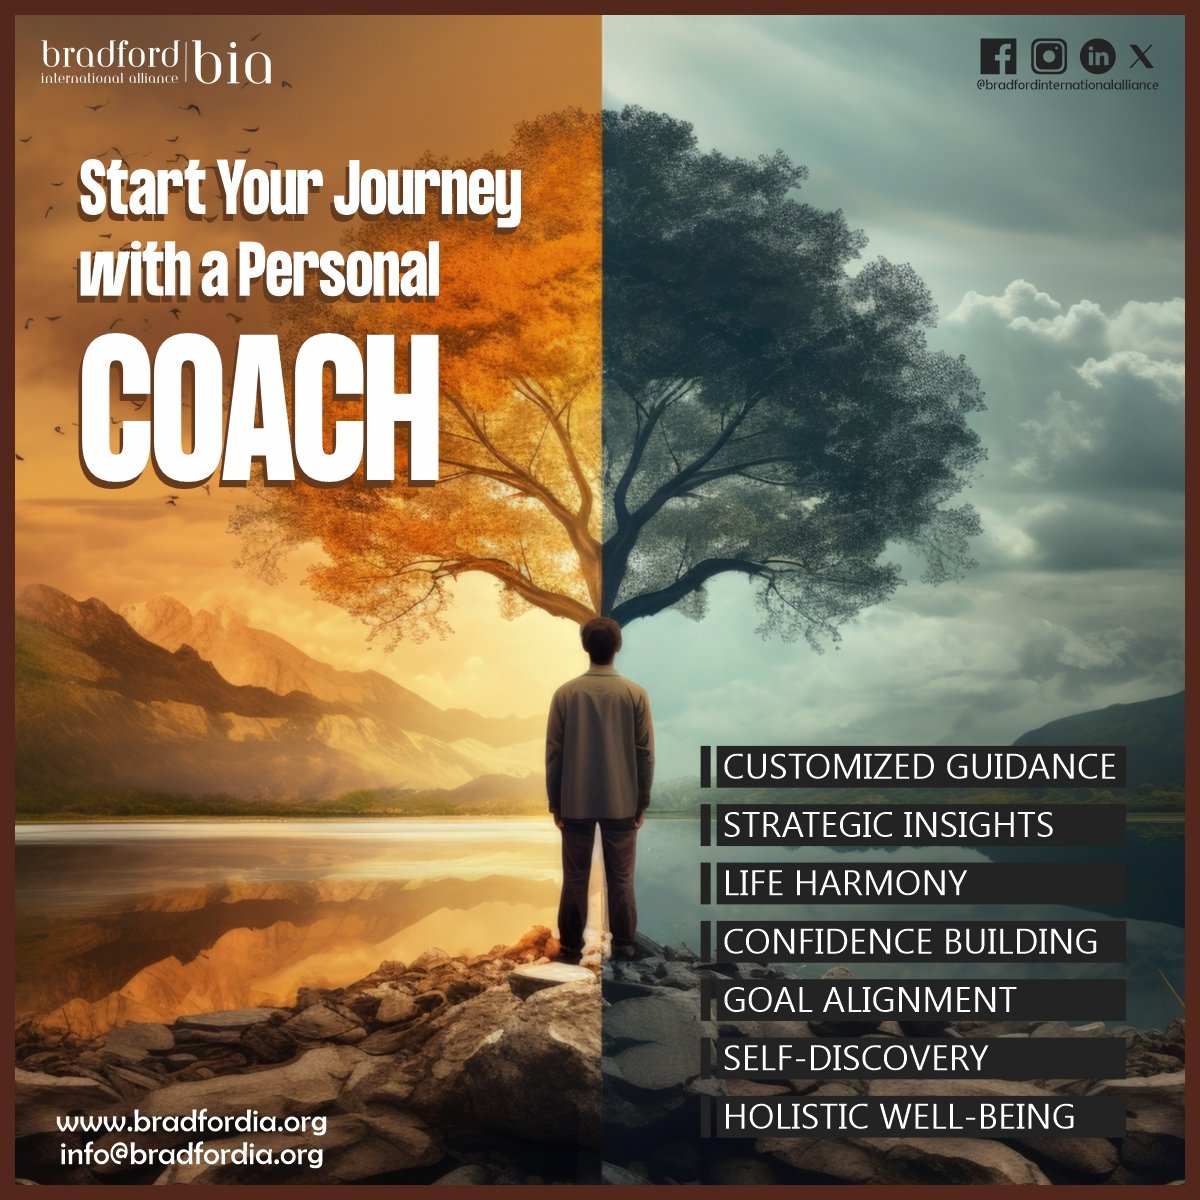 Empower Your Journey: Coaching for Growth, Success, and Fulfillment 
Discover a comprehensive range of coaching services tailored to professionals like you:

#CoachingServices #Empowerment #ProfessionalGrowt